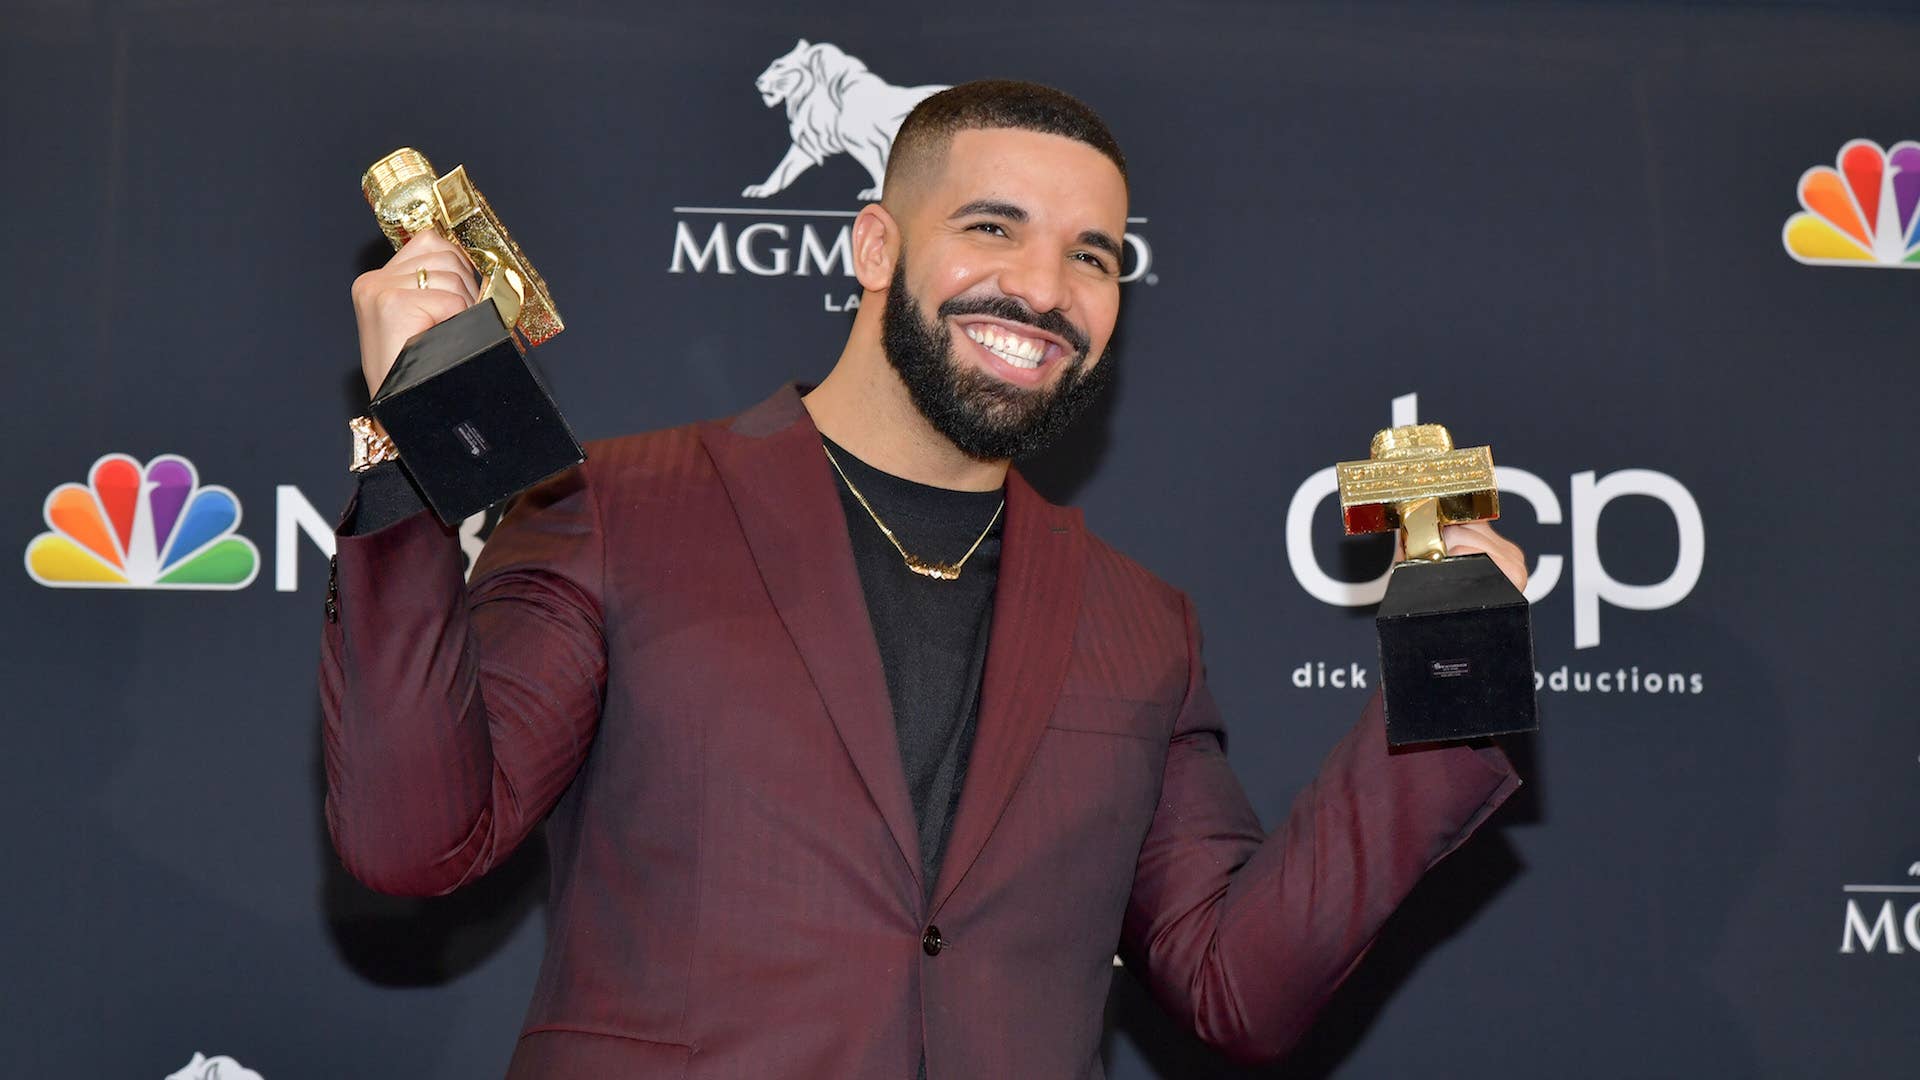 Drake poses with the awards for Top Artist, Top Male Artist, Top Billboard 200 Album